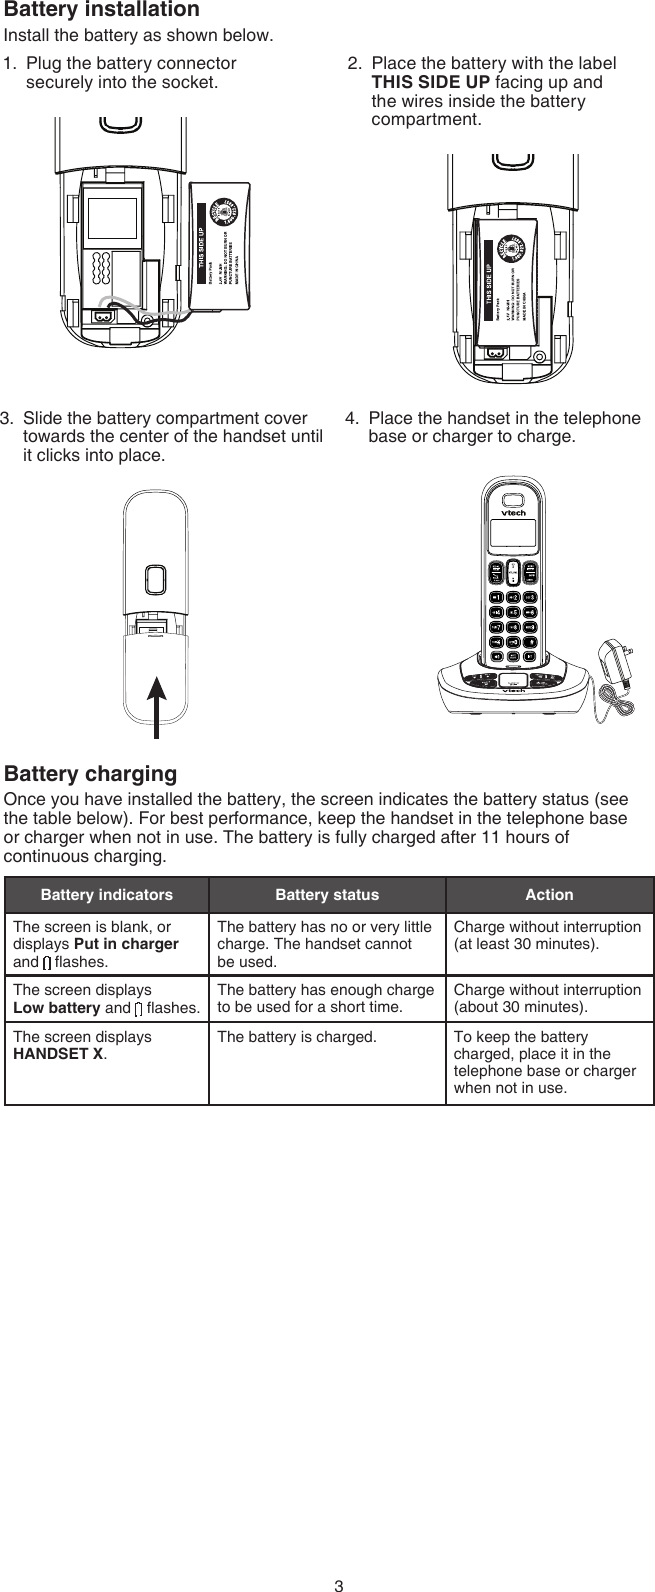 3Battery chargingOnce you have installed the battery, the screen indicates the battery status (see  the table below). For best performance, keep the handset in the telephone base  or charger when not in use. The battery is fully charged after 11 hours of  continuous charging.Battery indicators Battery status ActionThe screen is blank, or displays Put in charger and   ashes.The battery has no or very little charge. The handset cannot be used.Charge without interruption (at least 30 minutes).The screen displays Low battery and   ashes. The battery has enough charge to be used for a short time.Charge without interruption (about 30 minutes).The screen displays  HANDSET X.The battery is charged. To keep the battery charged, place it in the telephone base or charger when not in use.Battery installationInstall the battery as shown below.Plug the battery connector securely into the socket.1. Place the battery with the label THIS SIDE UP facing up and the wires inside the battery compartment.2.Slide the battery compartment cover towards the center of the handset until it clicks into place.3. Place the handset in the telephone base or charger to charge.4.